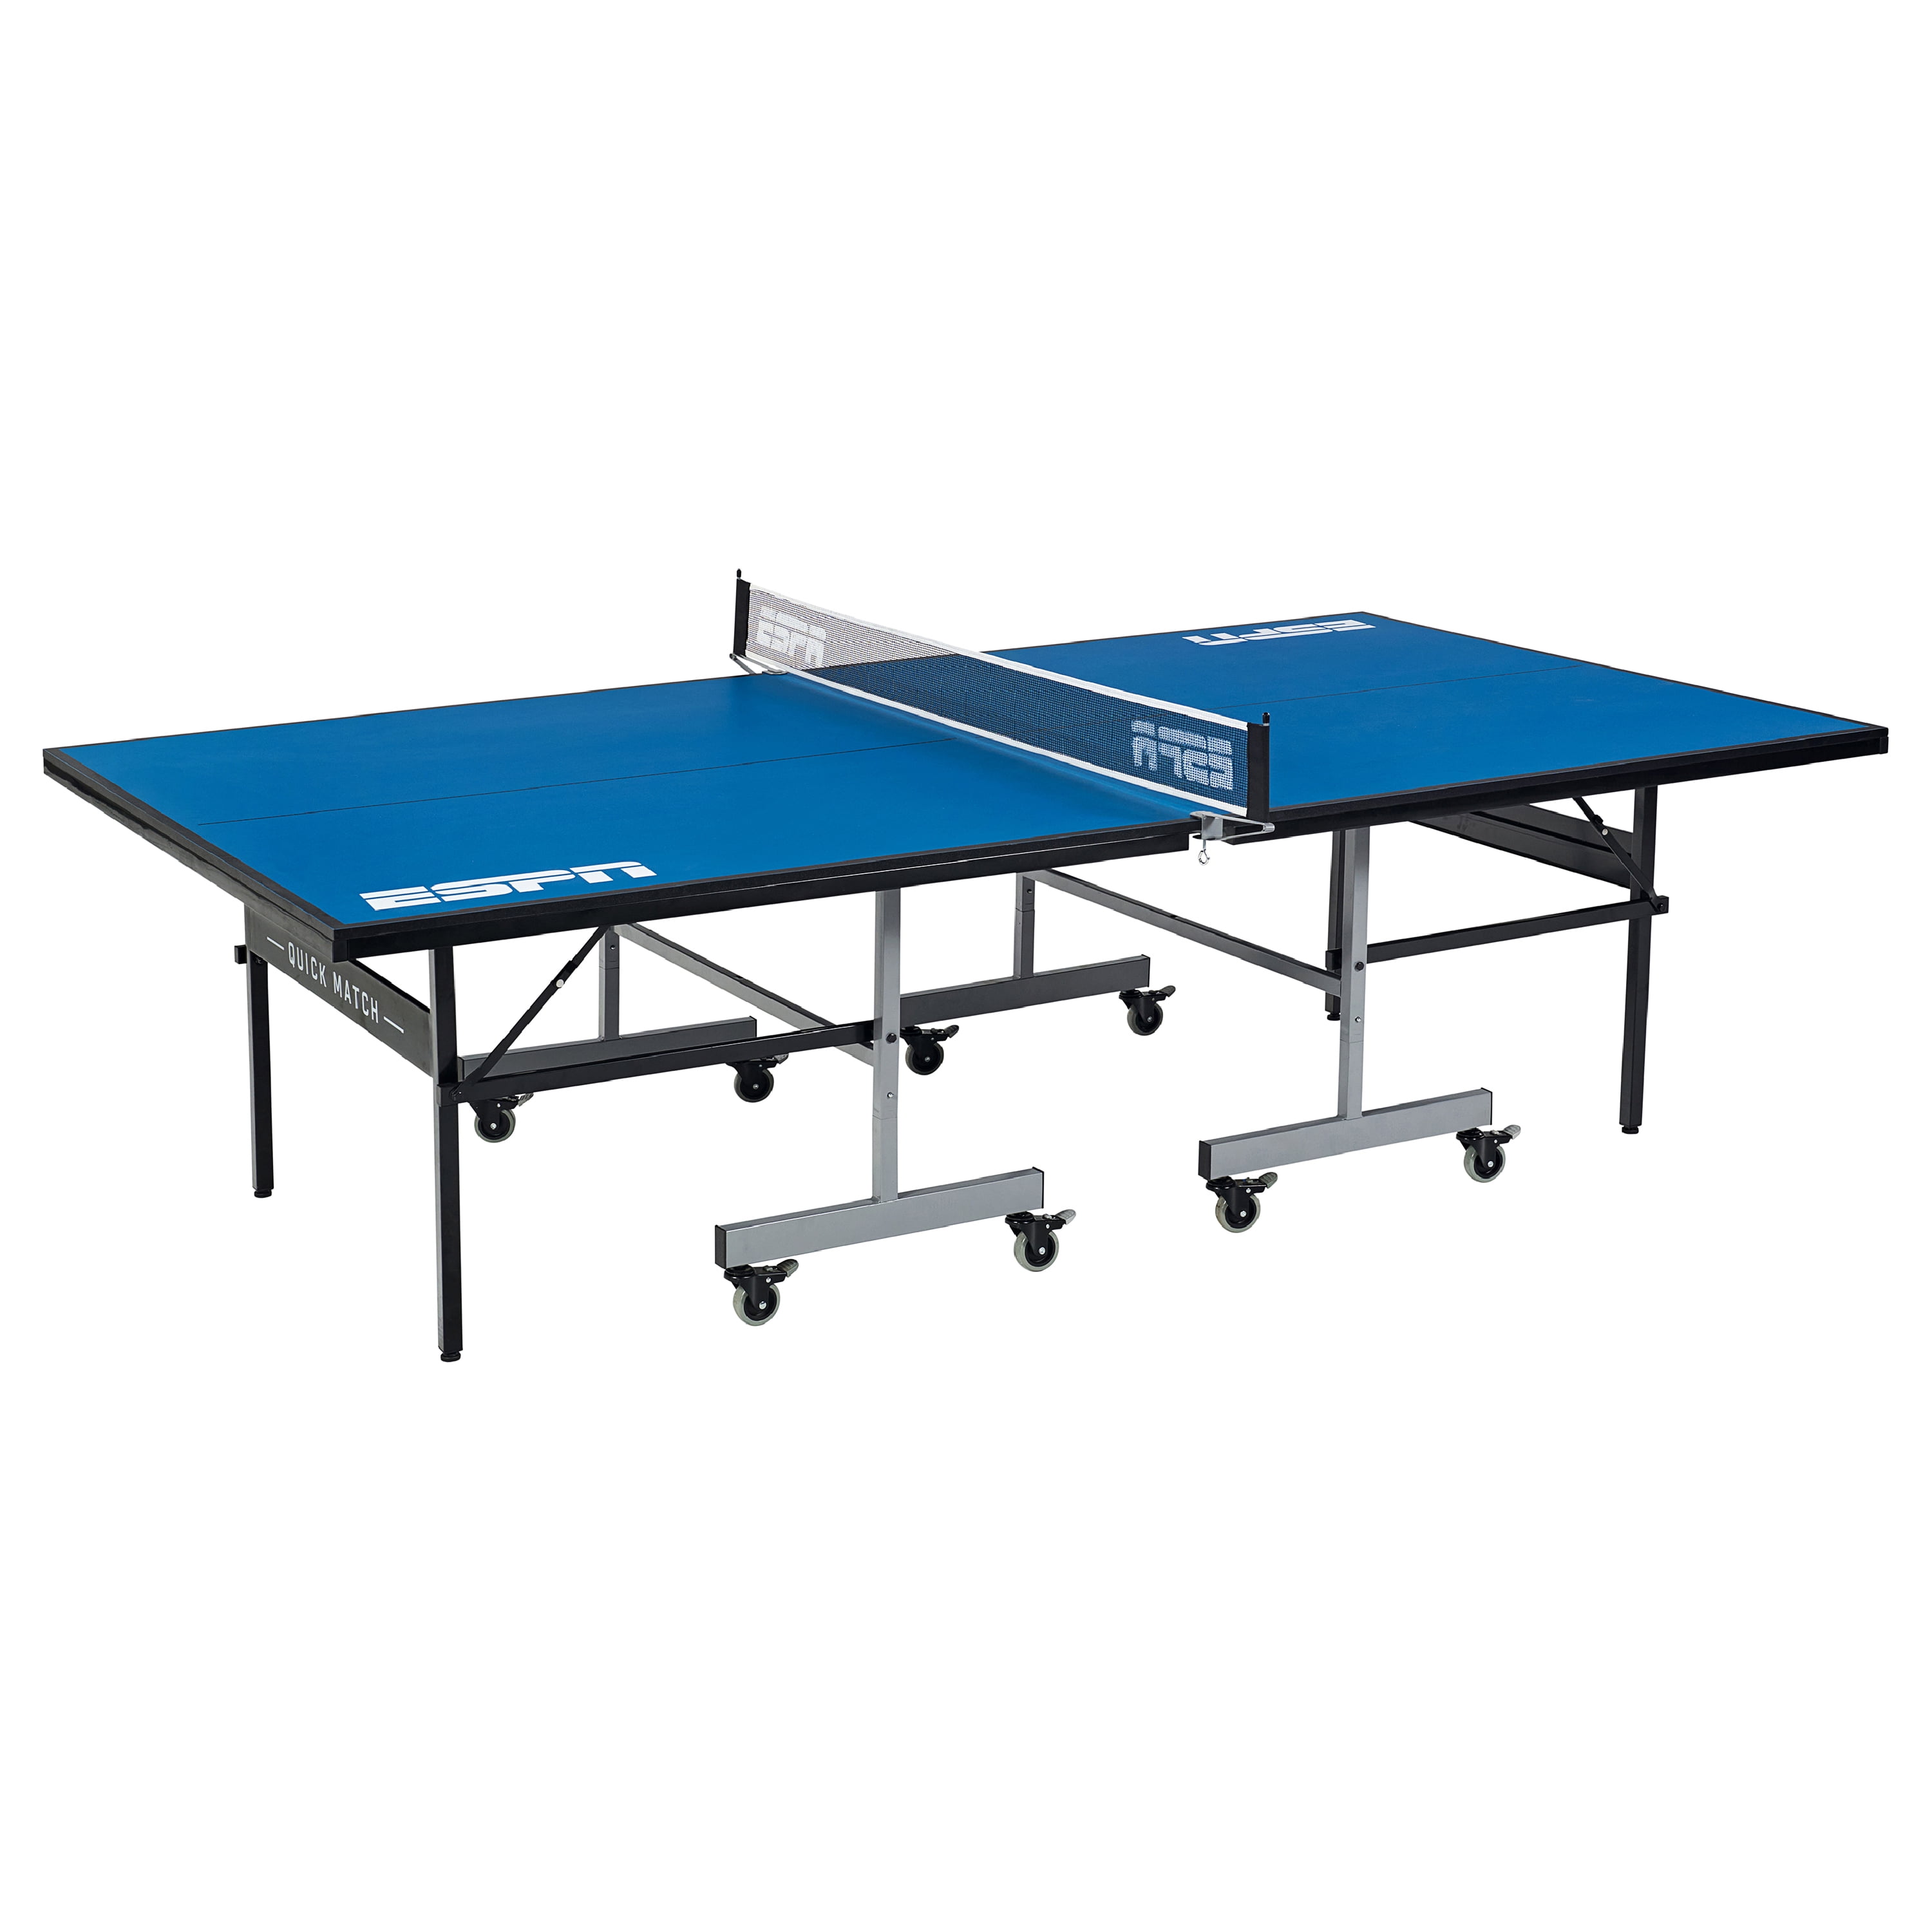 MD Sports Official Size Table Tennis Table Black/Blue/White 